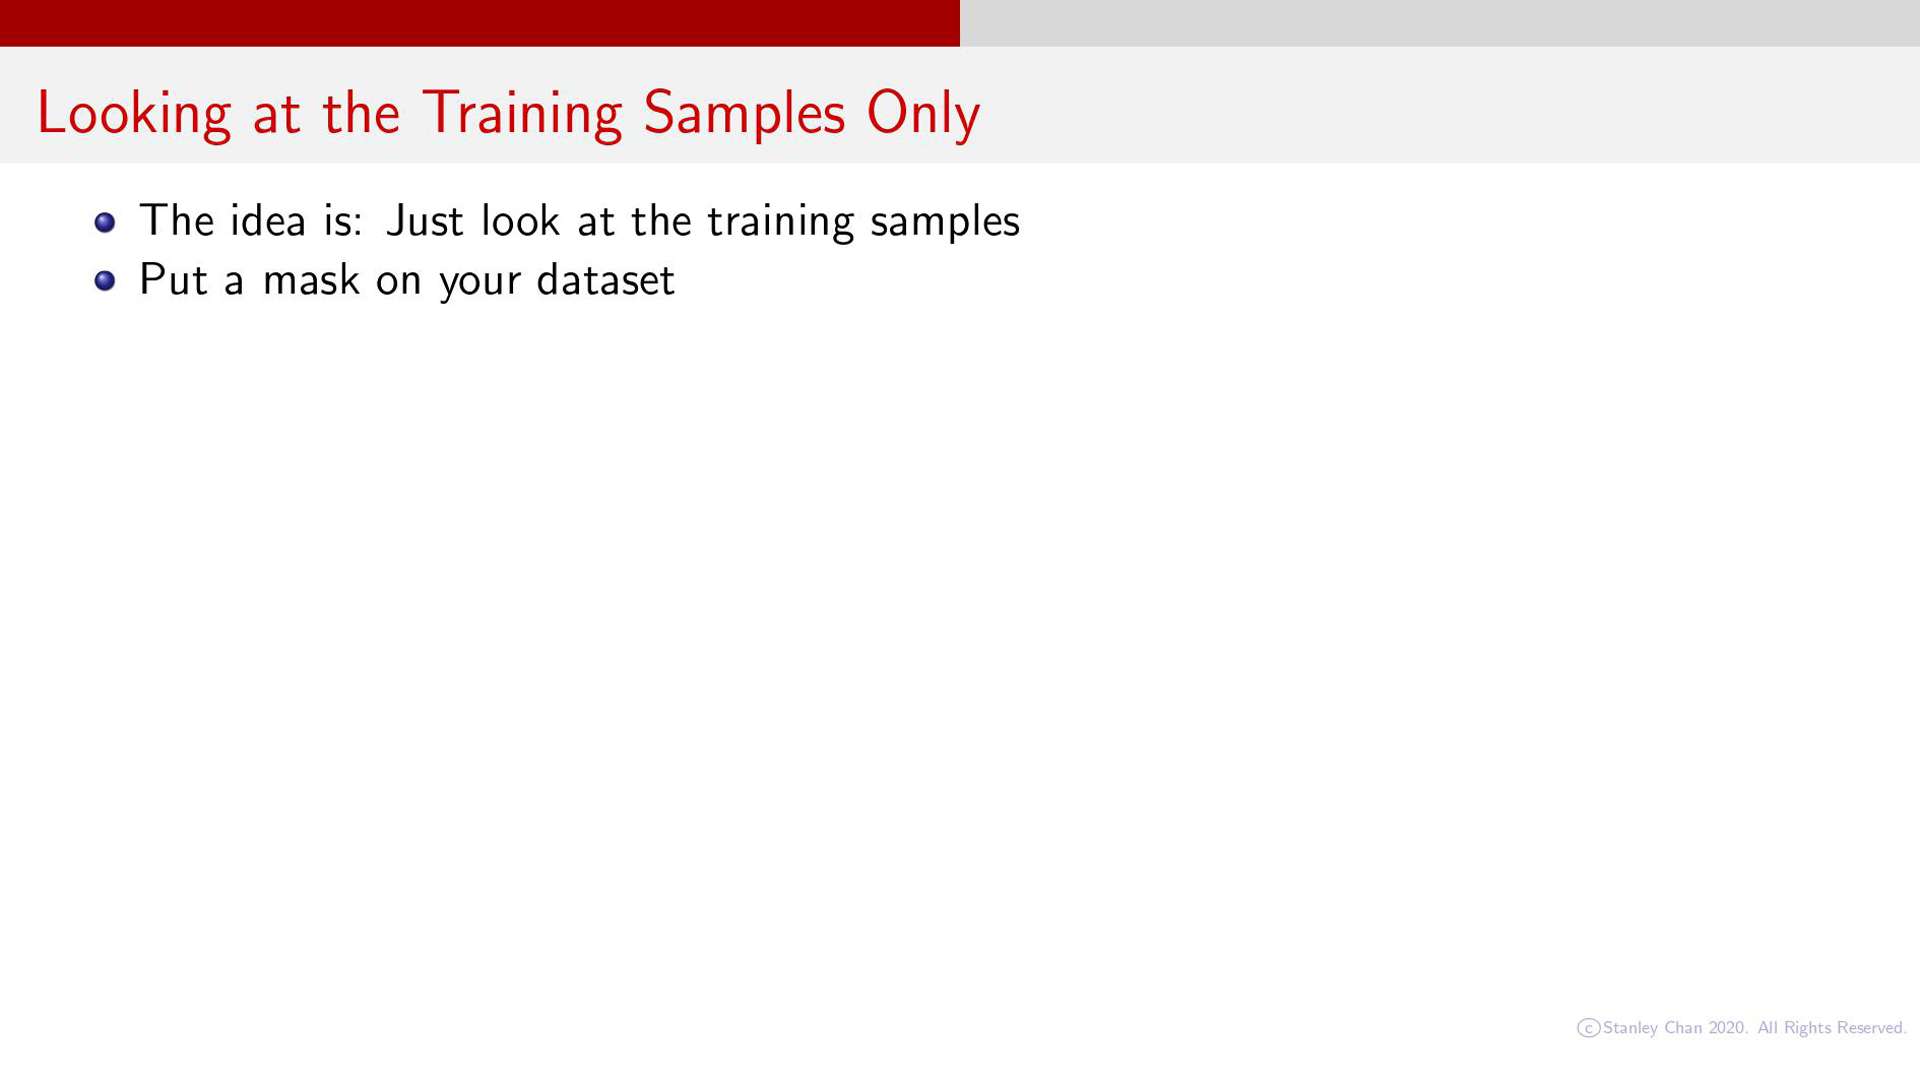 Looking at the Training Samples Only